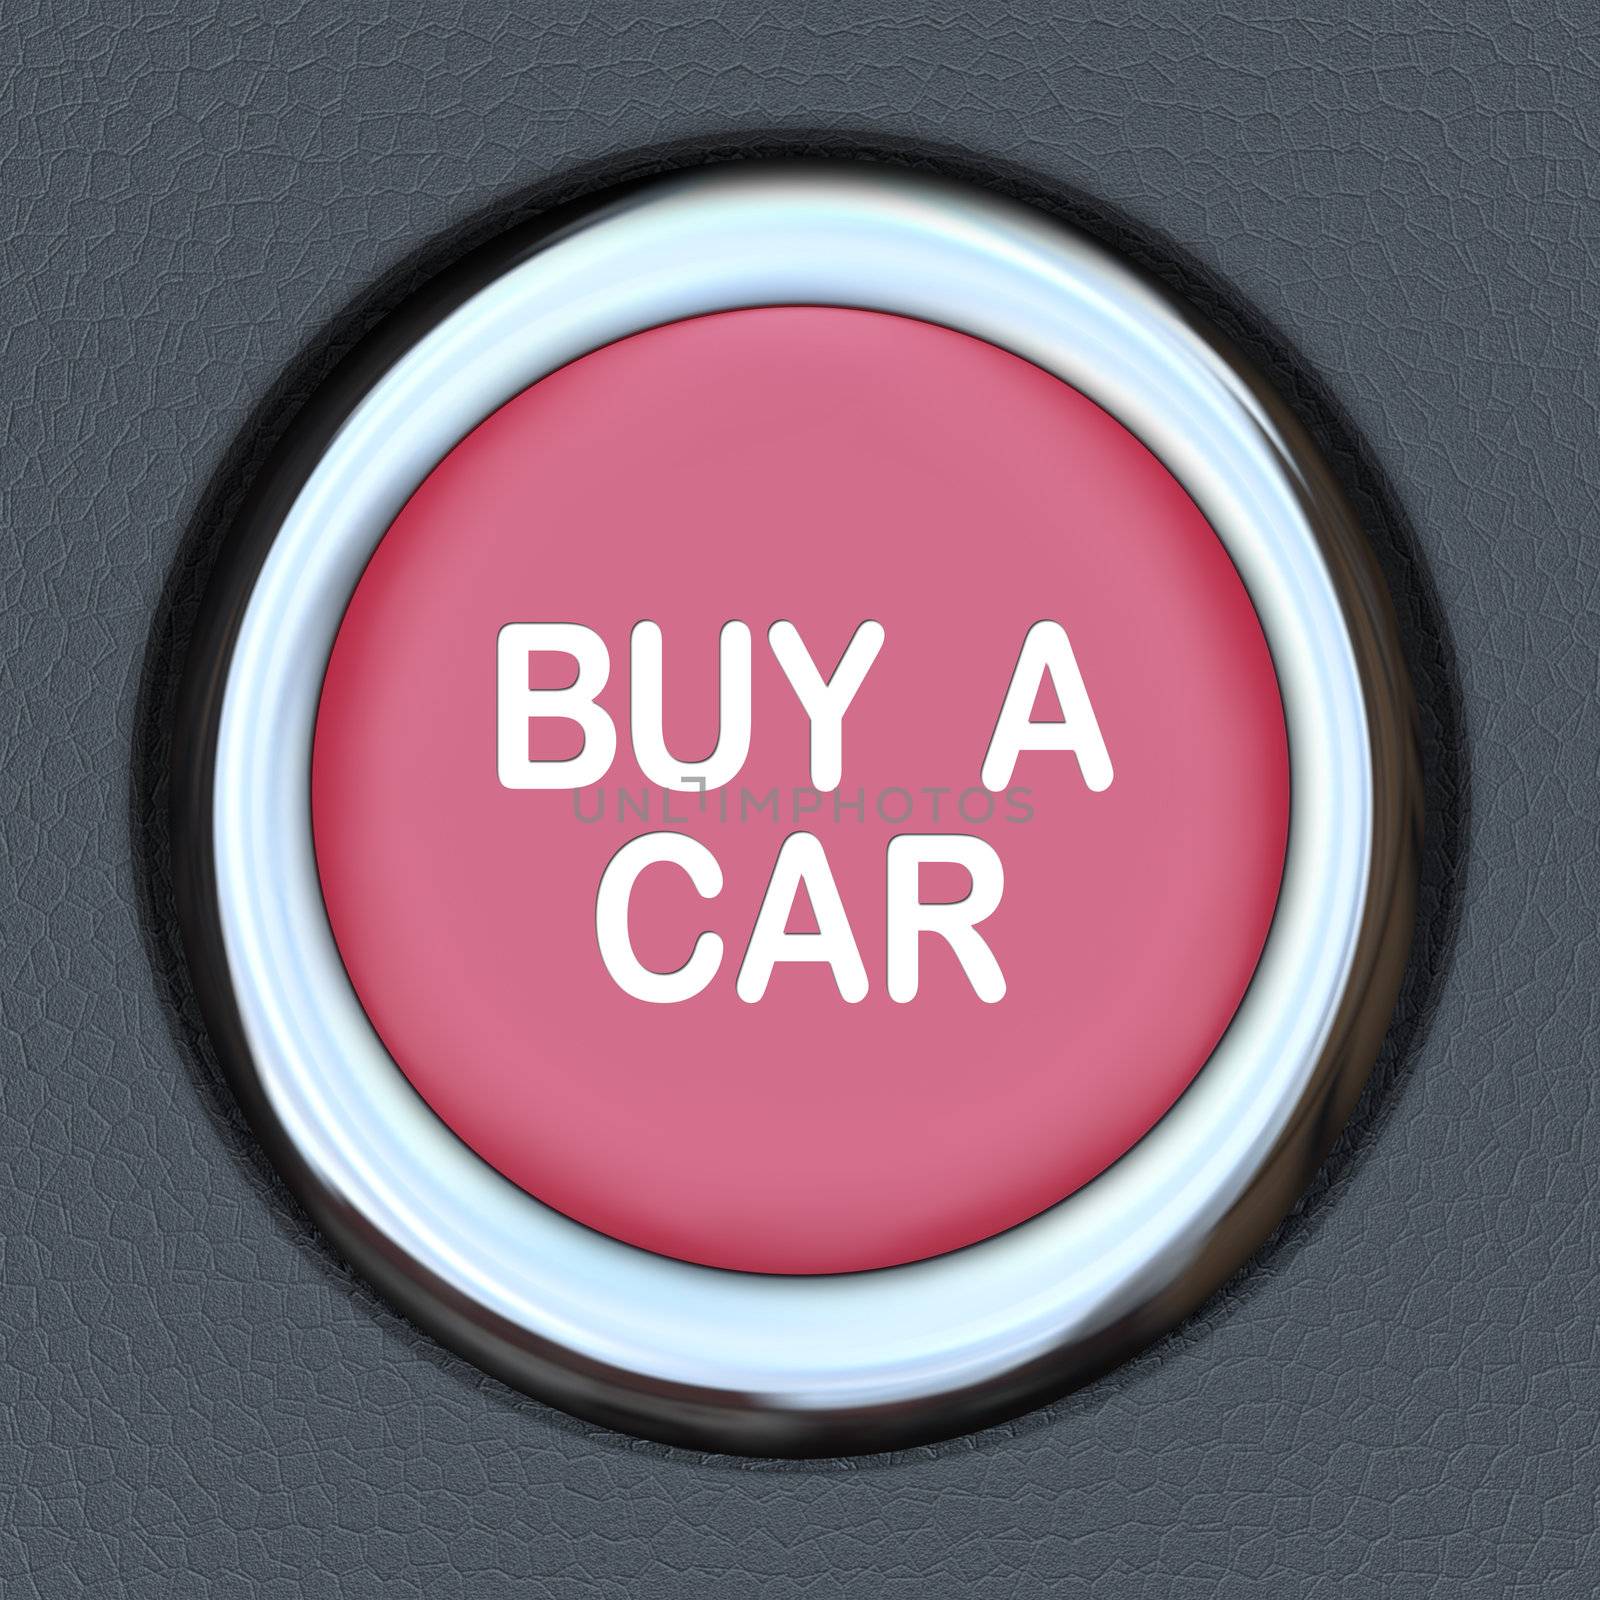 Buy a Car Push Button Start Browsing Shopping for Vehicle by iQoncept